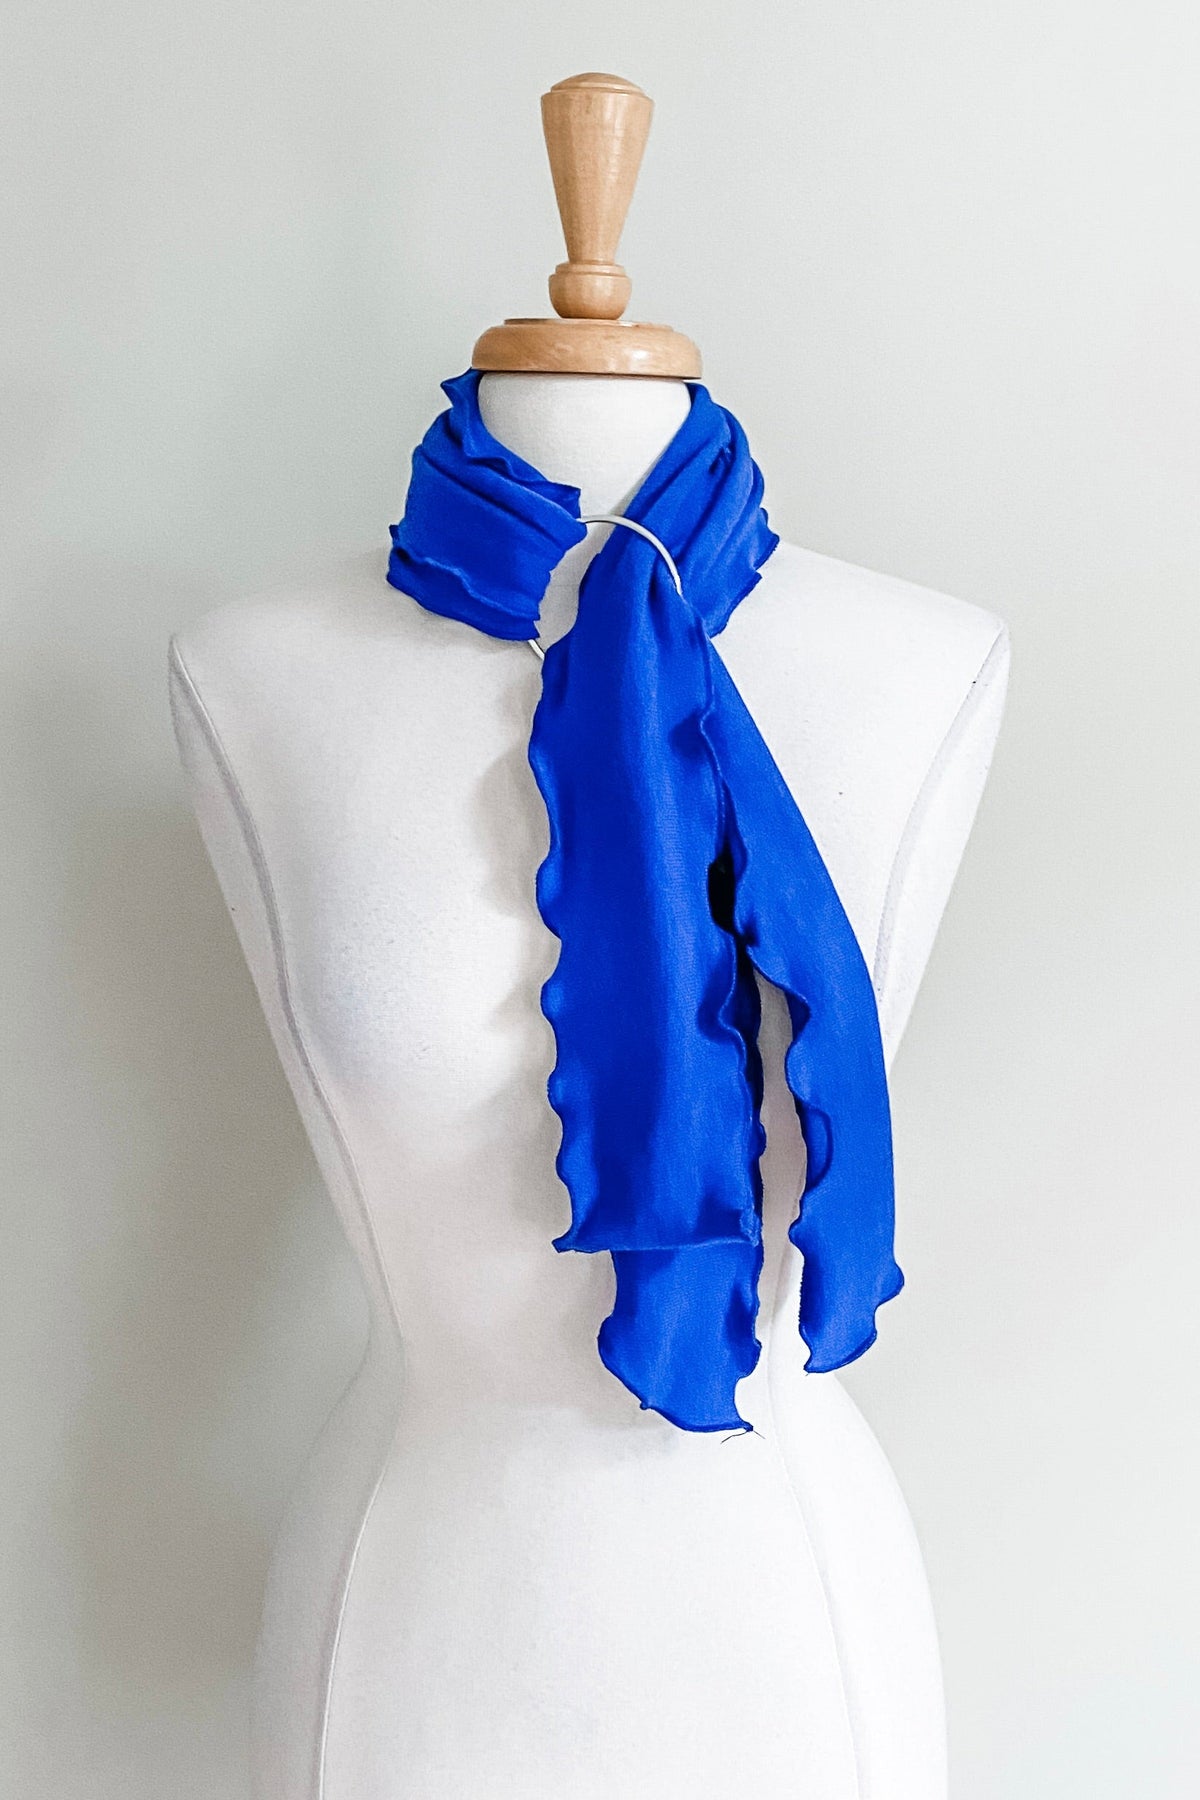 Matching Sash in Royal color from Diane Kroe